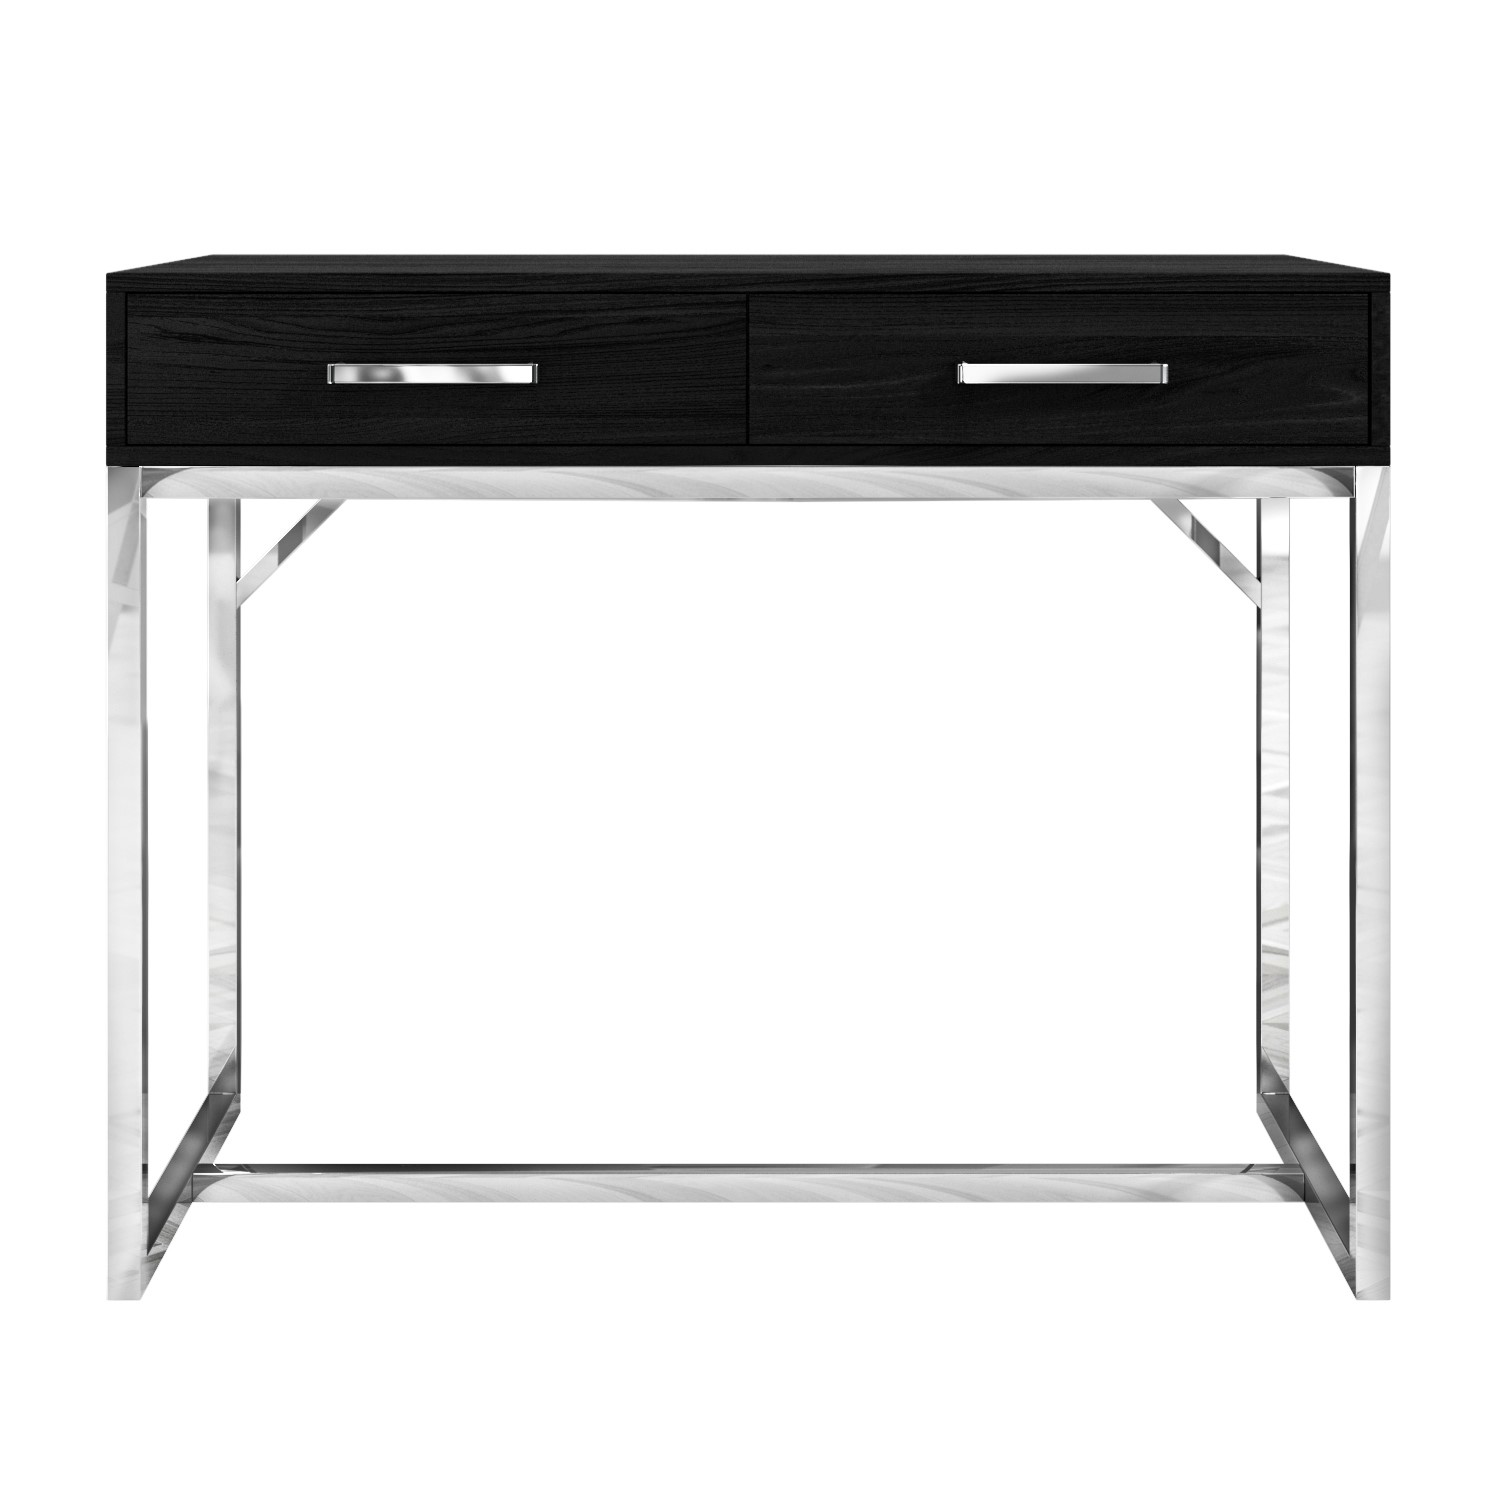 Read more about Black modern dressing table with 2 drawers and chrome legs kaia